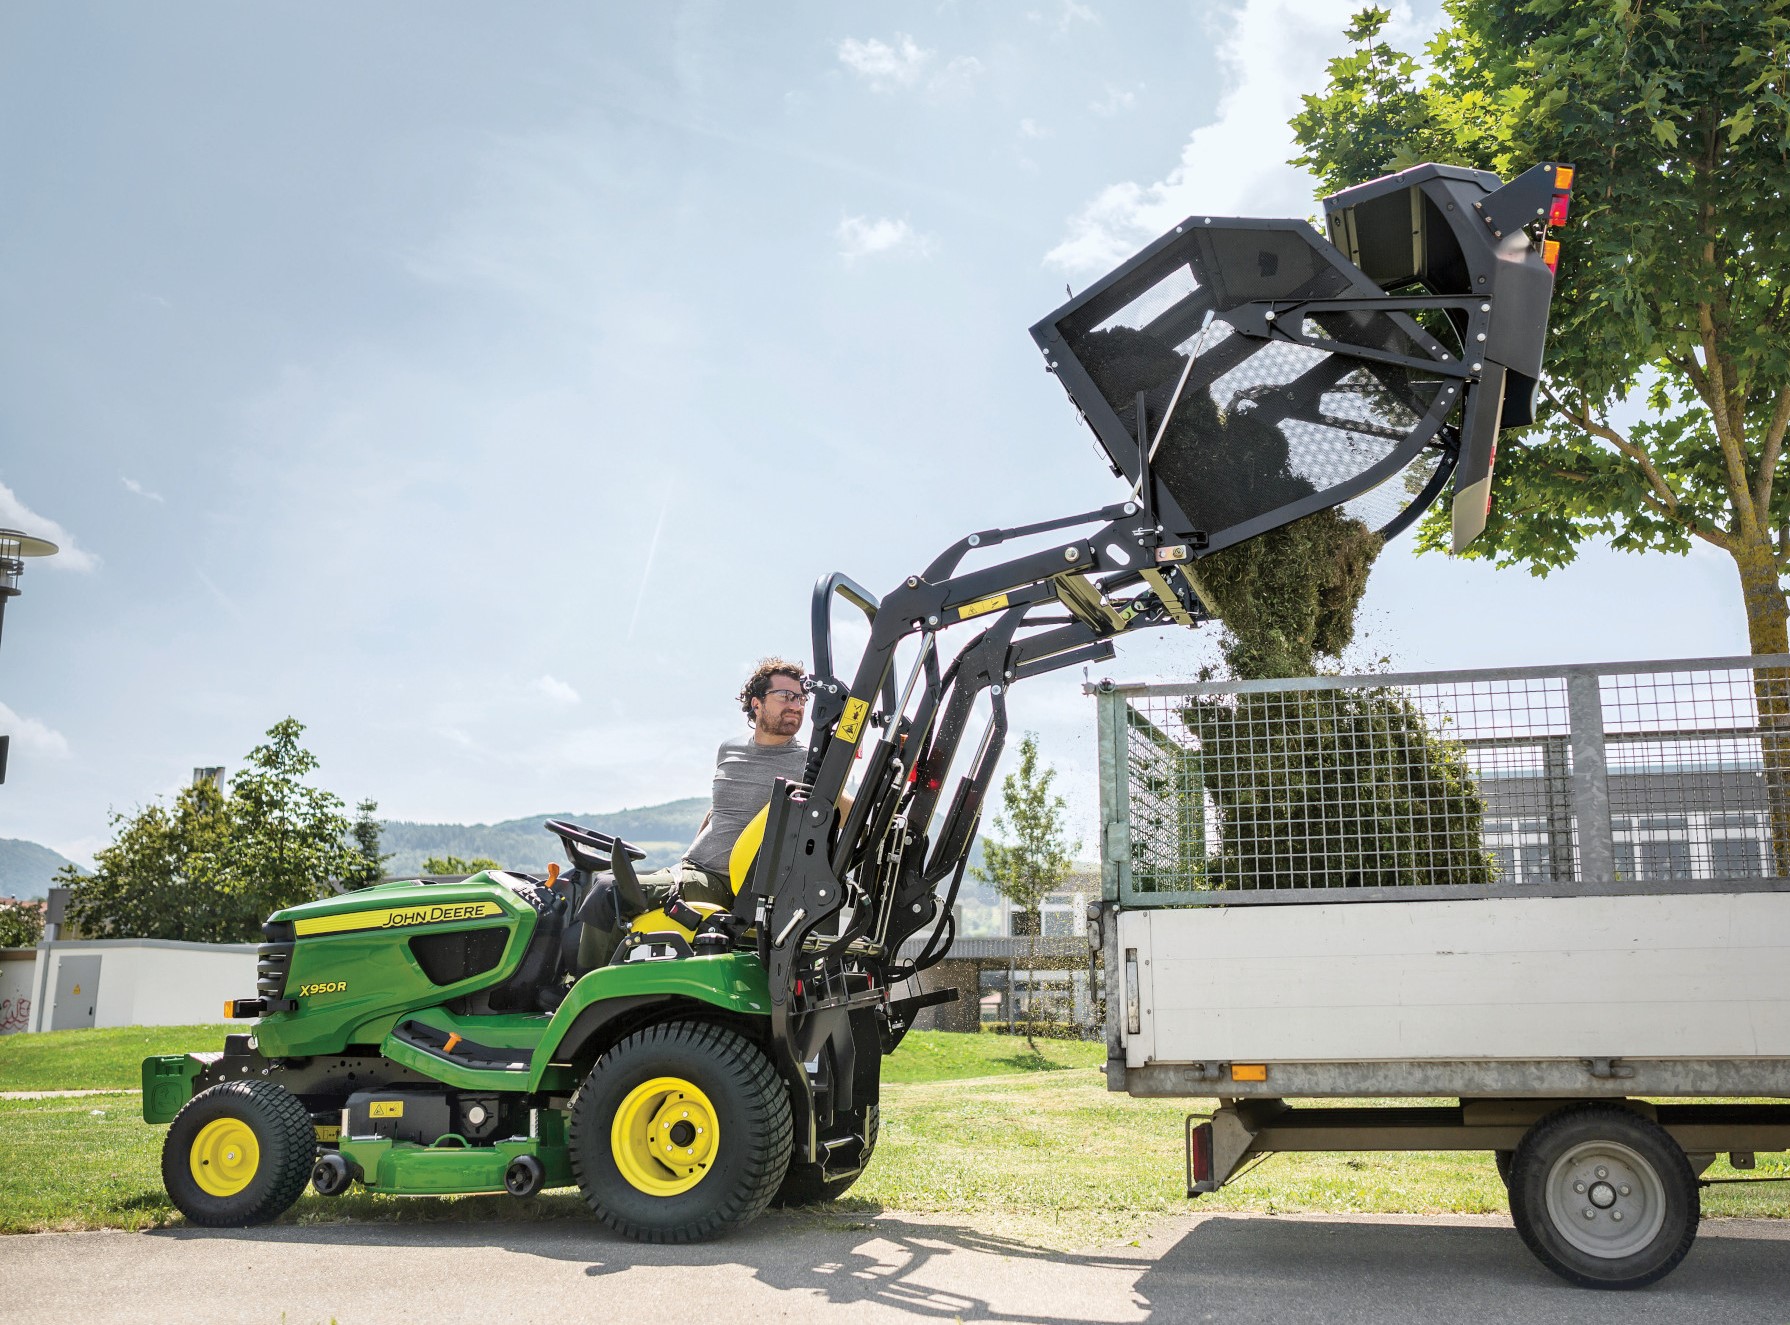 The John Deere X950R commercial mower with hi-tip collector